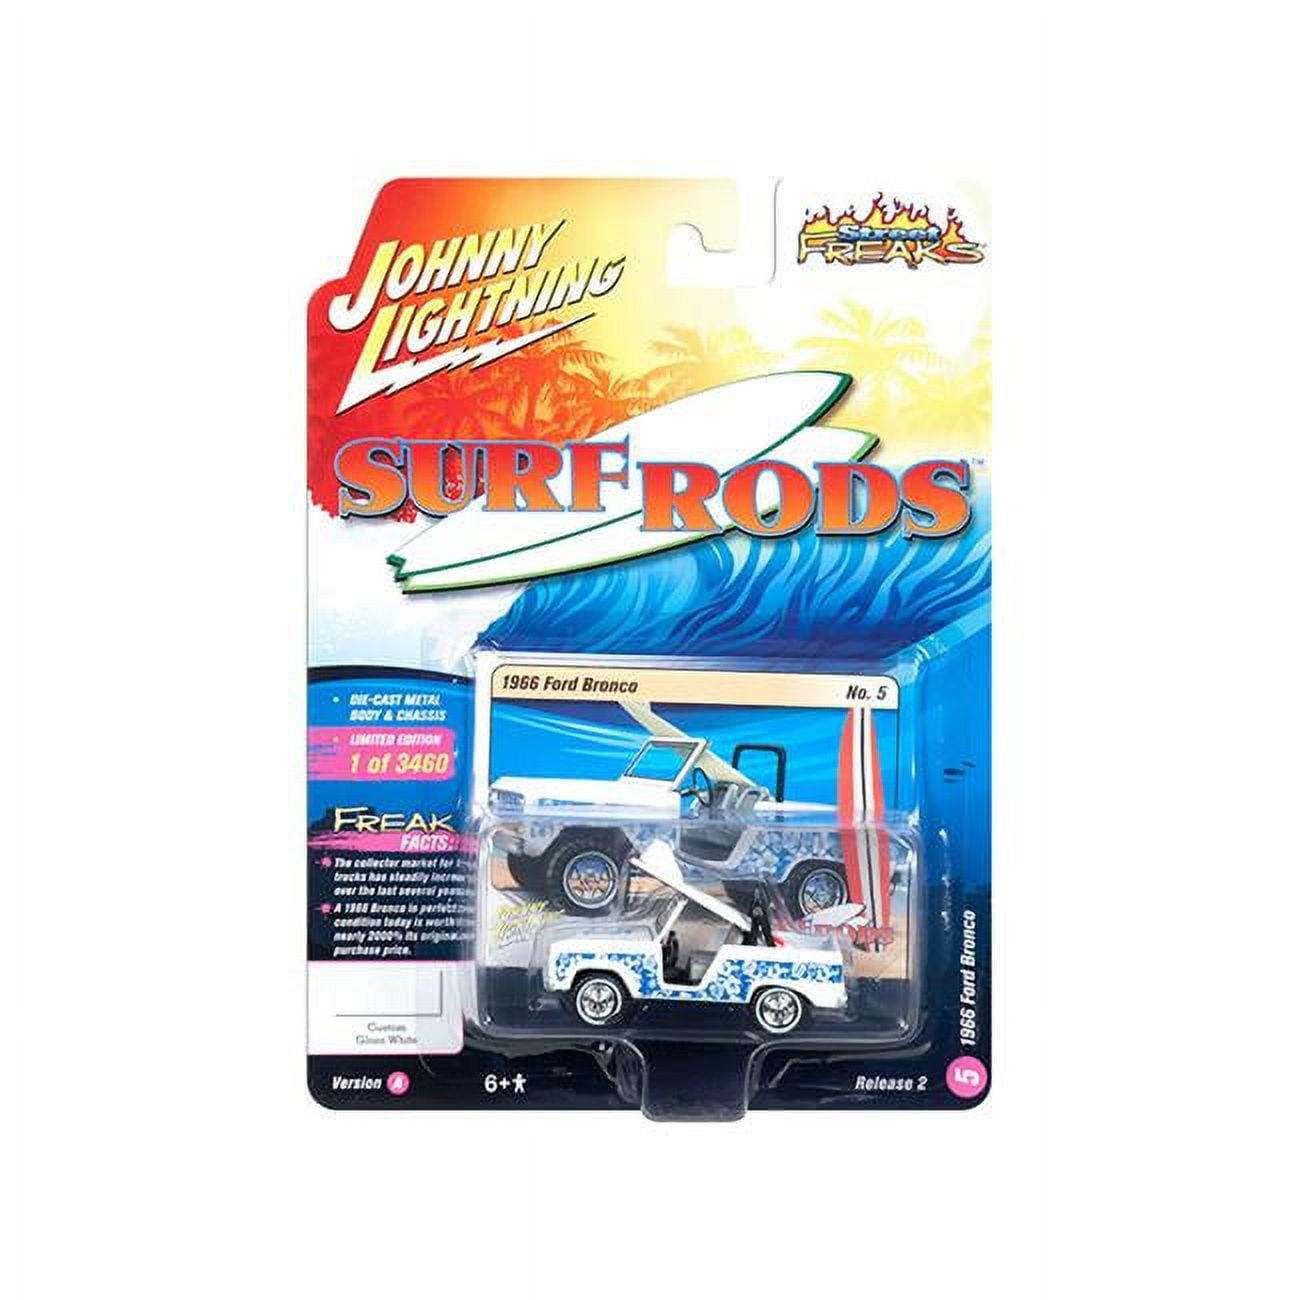 Jlsf008-jlcp7099 1966 Ford Bronco Car With Surf Board Designs Street Freaks Limited Edition, White & Blue - 3460 Piece